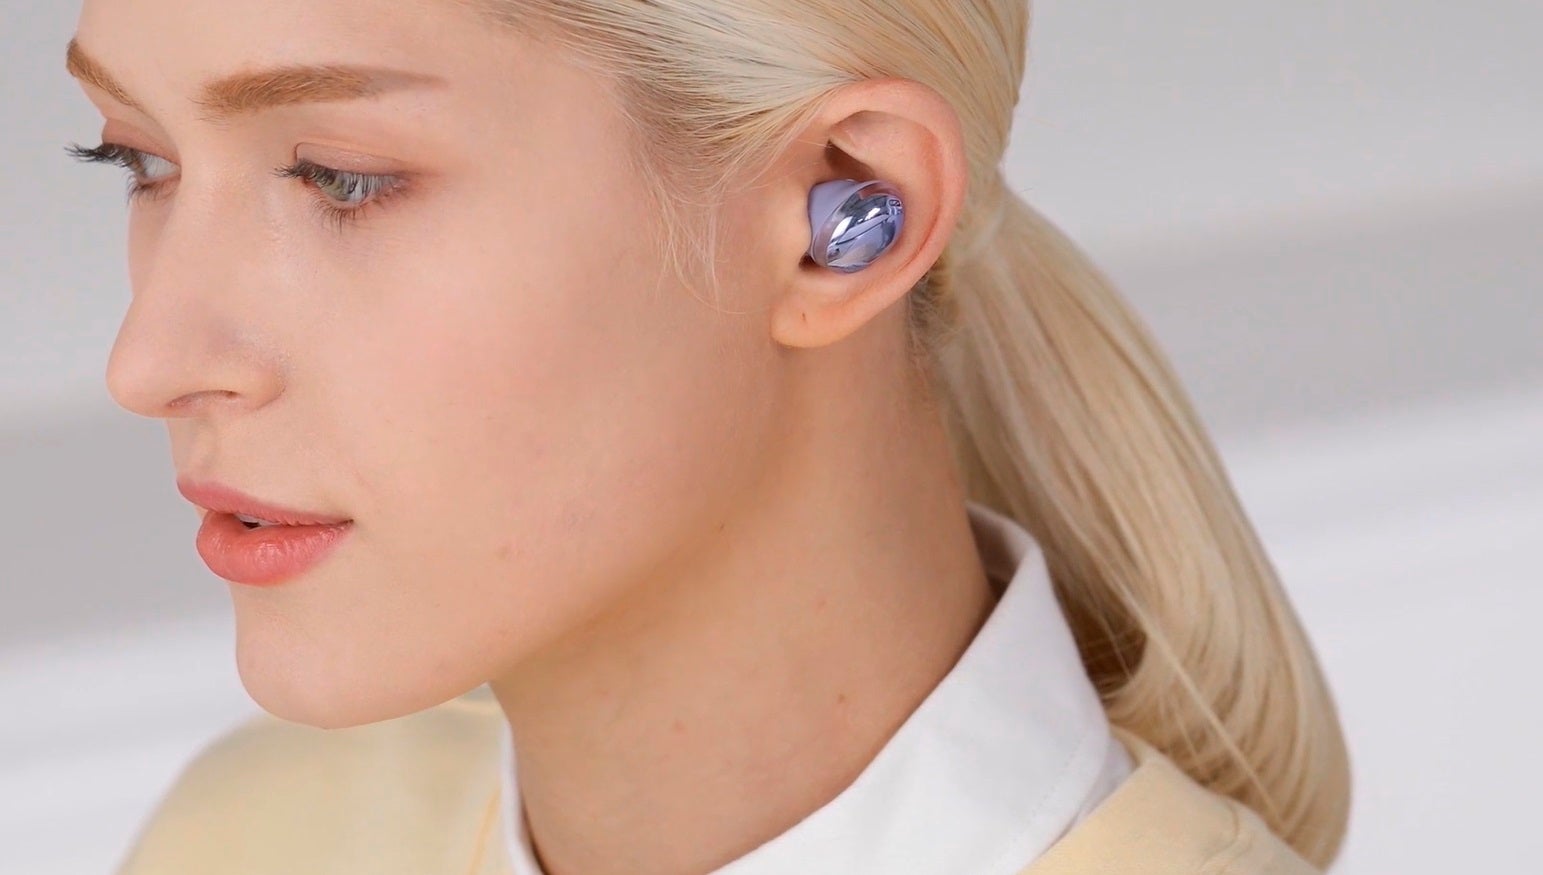 Samsung's Galaxy Buds Pro true wireless earbuds are now official